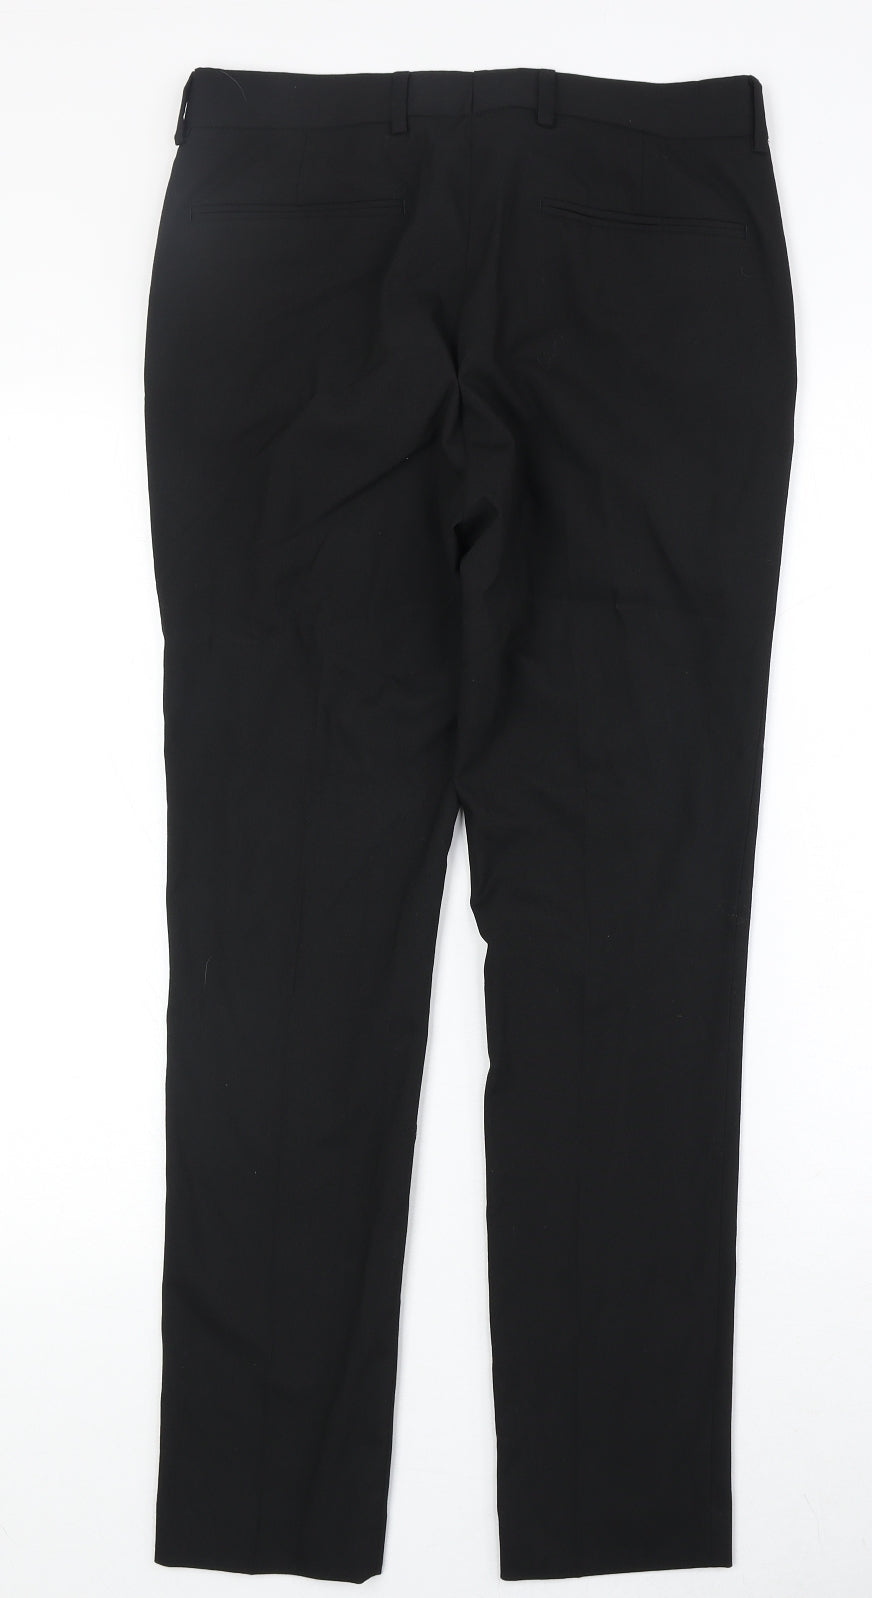 New Look Mens Black Polyester Dress Pants Trousers Size 30 in Regular Zip